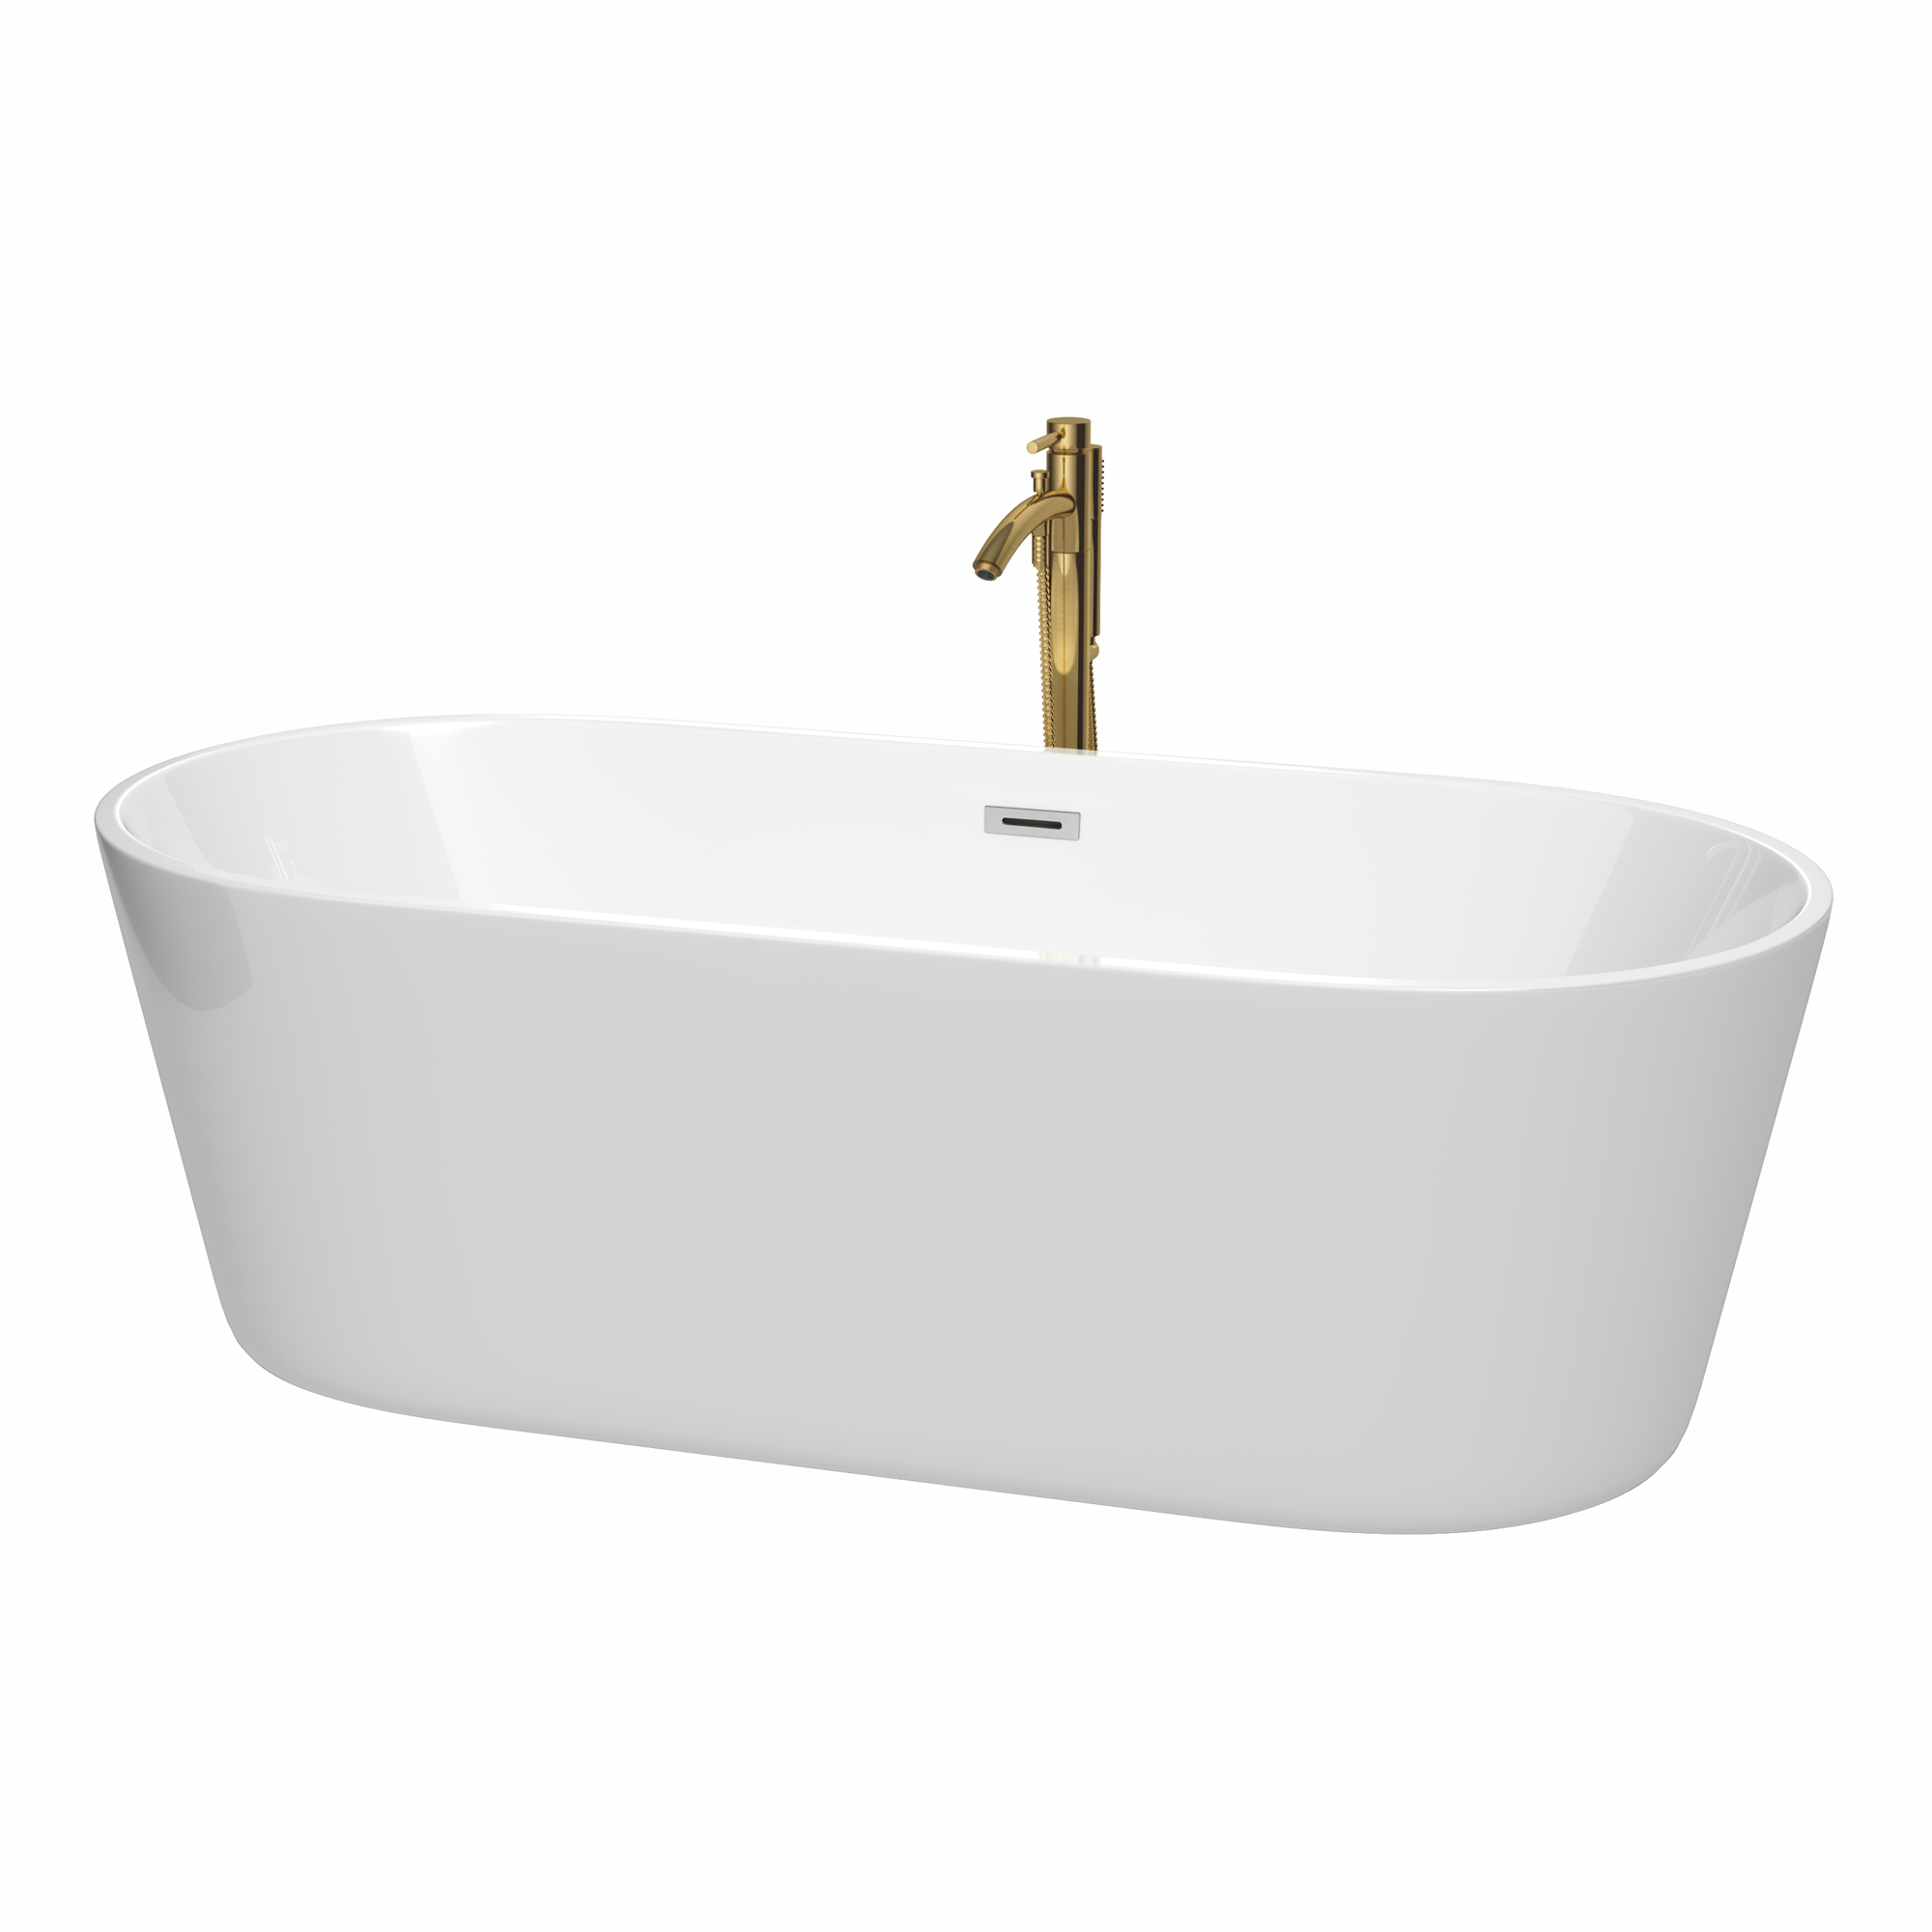 71" Freestanding Bathtub in White with Floor Mounted Faucet in Brushed Gold and Polished Chrome Trim Finish